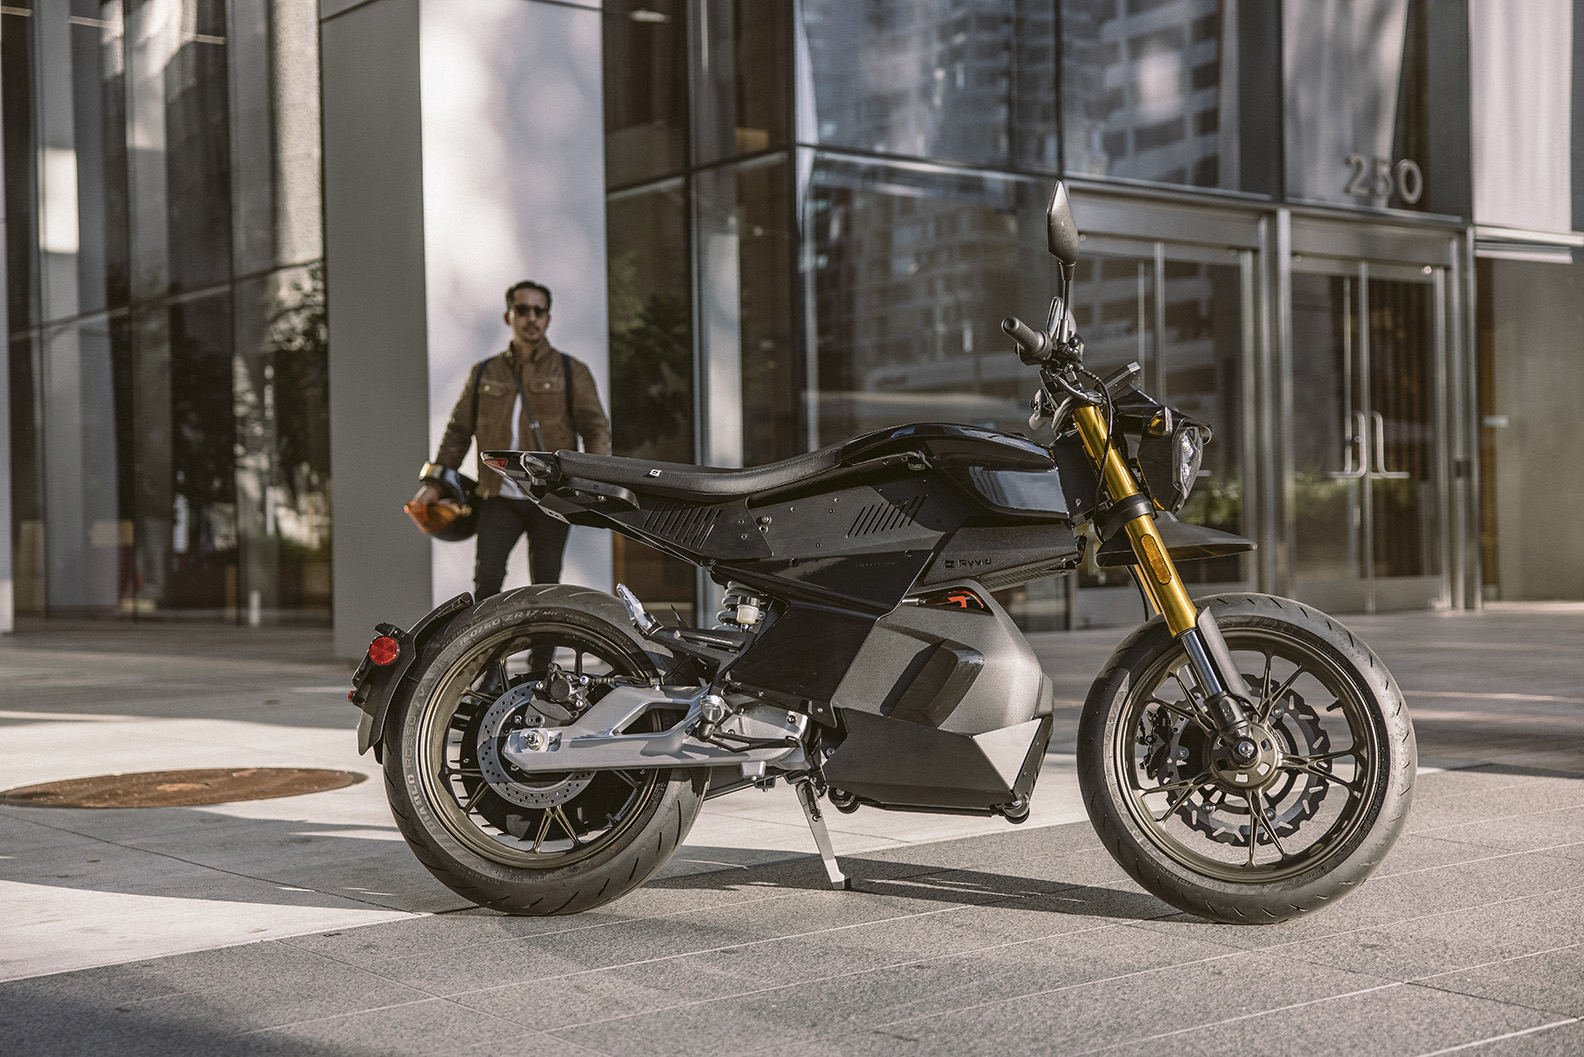 Ryvid Anthem lightweight, affordable electric motorcycle for commuters and adventure-seekers alike